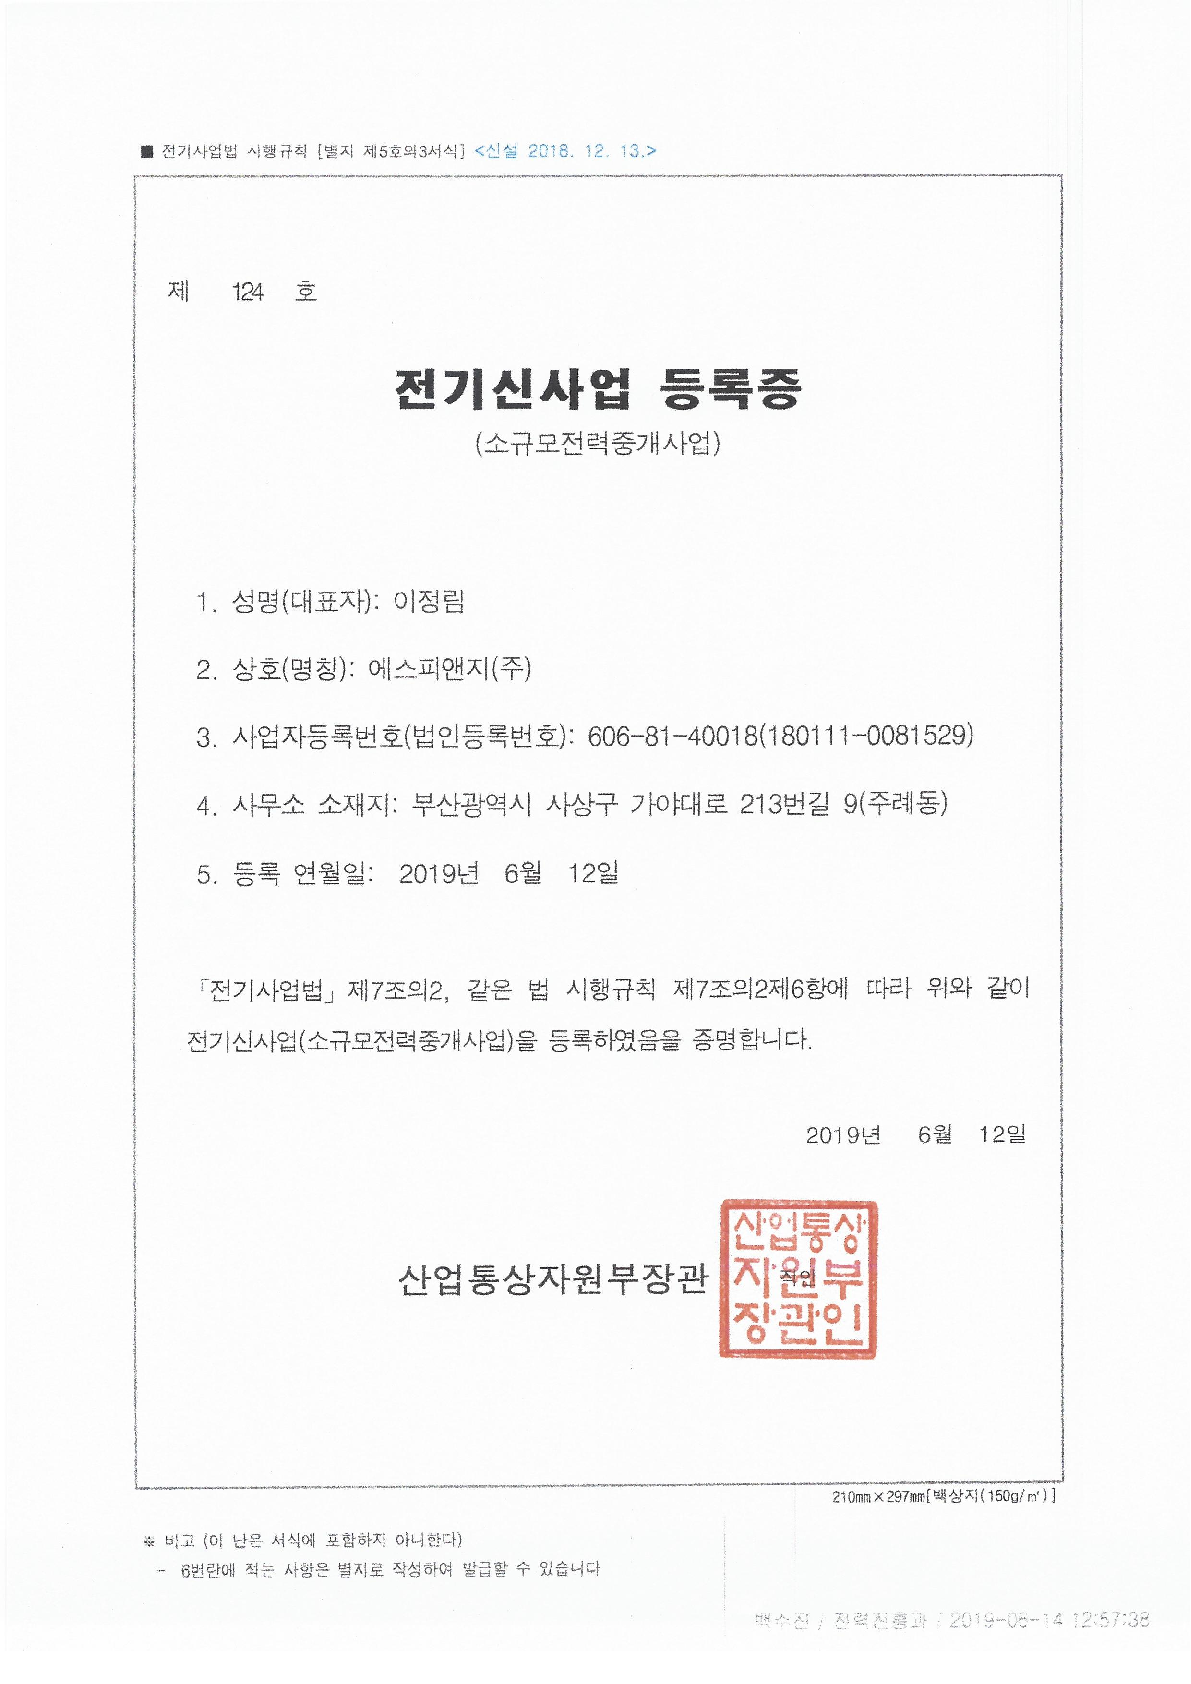 New Electrical Business License  이미지